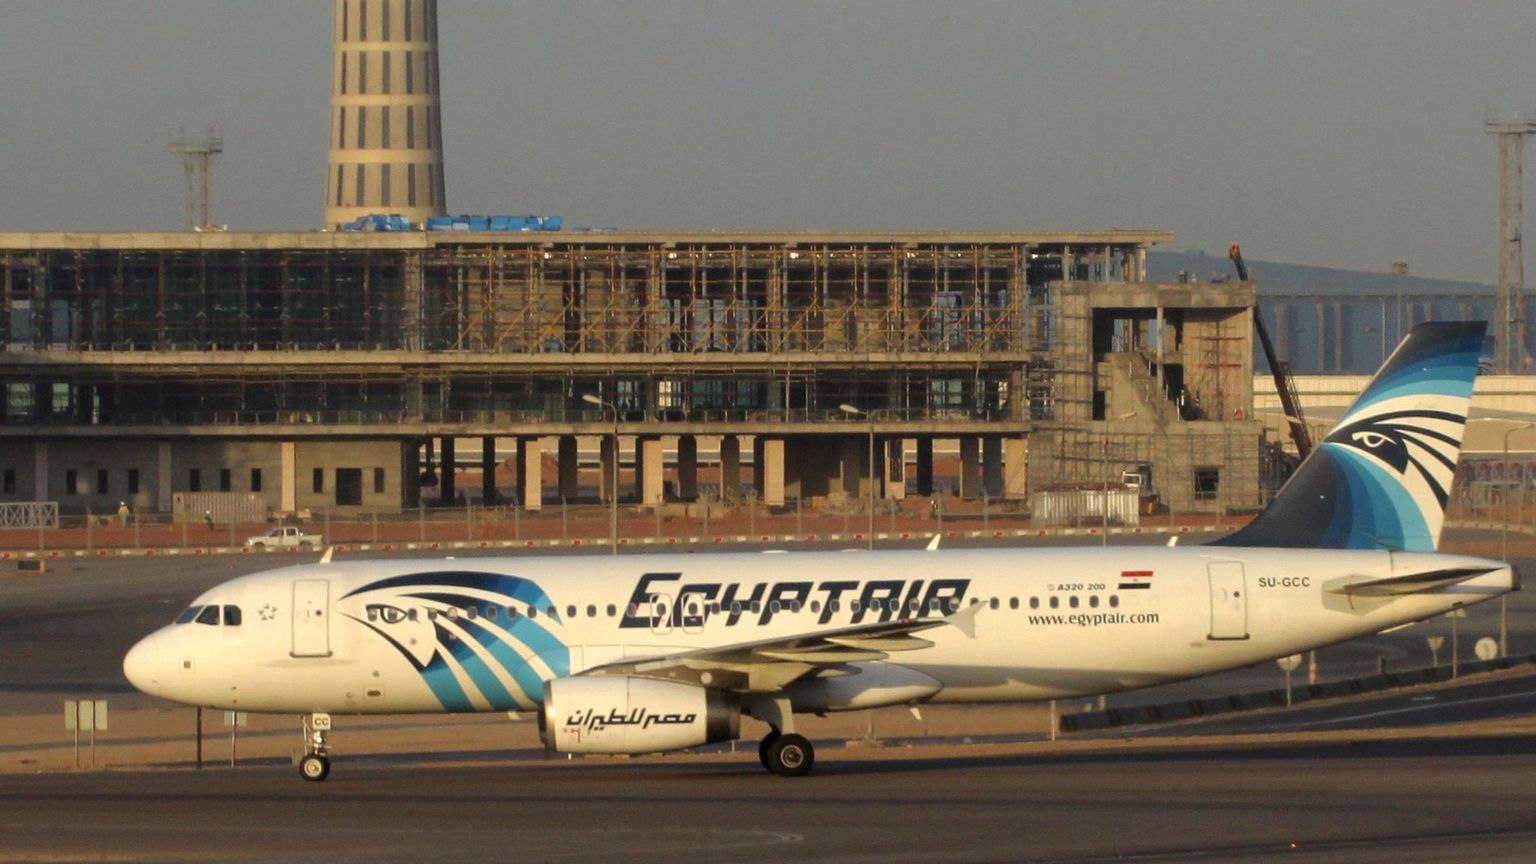 File photo of EgyptAir Airbus A320-232 (registration SU-GCC) that has gone missing while flying from Paris to Cairo as Flight MS804